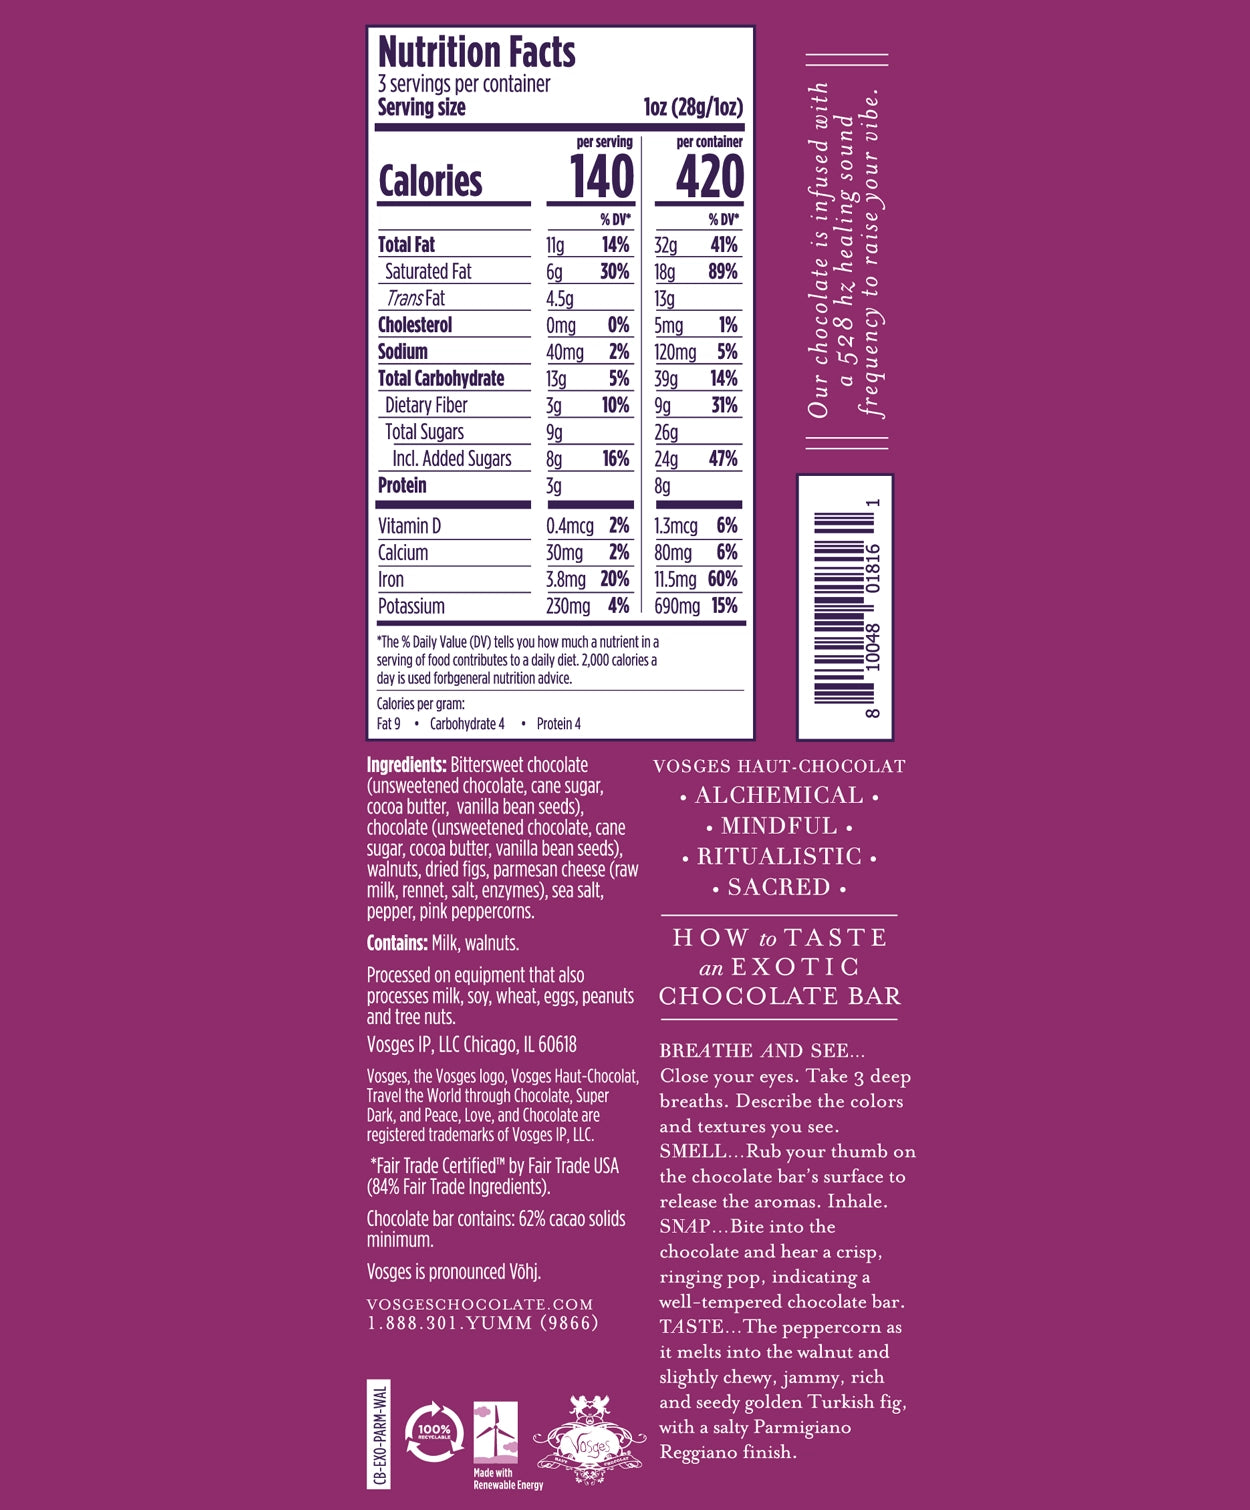 Nutrition Facts and Ingredients of Vosges Haut-Chocolat Parmesan Walnut and Fig bar in white, san-serif font on a bright pink background.